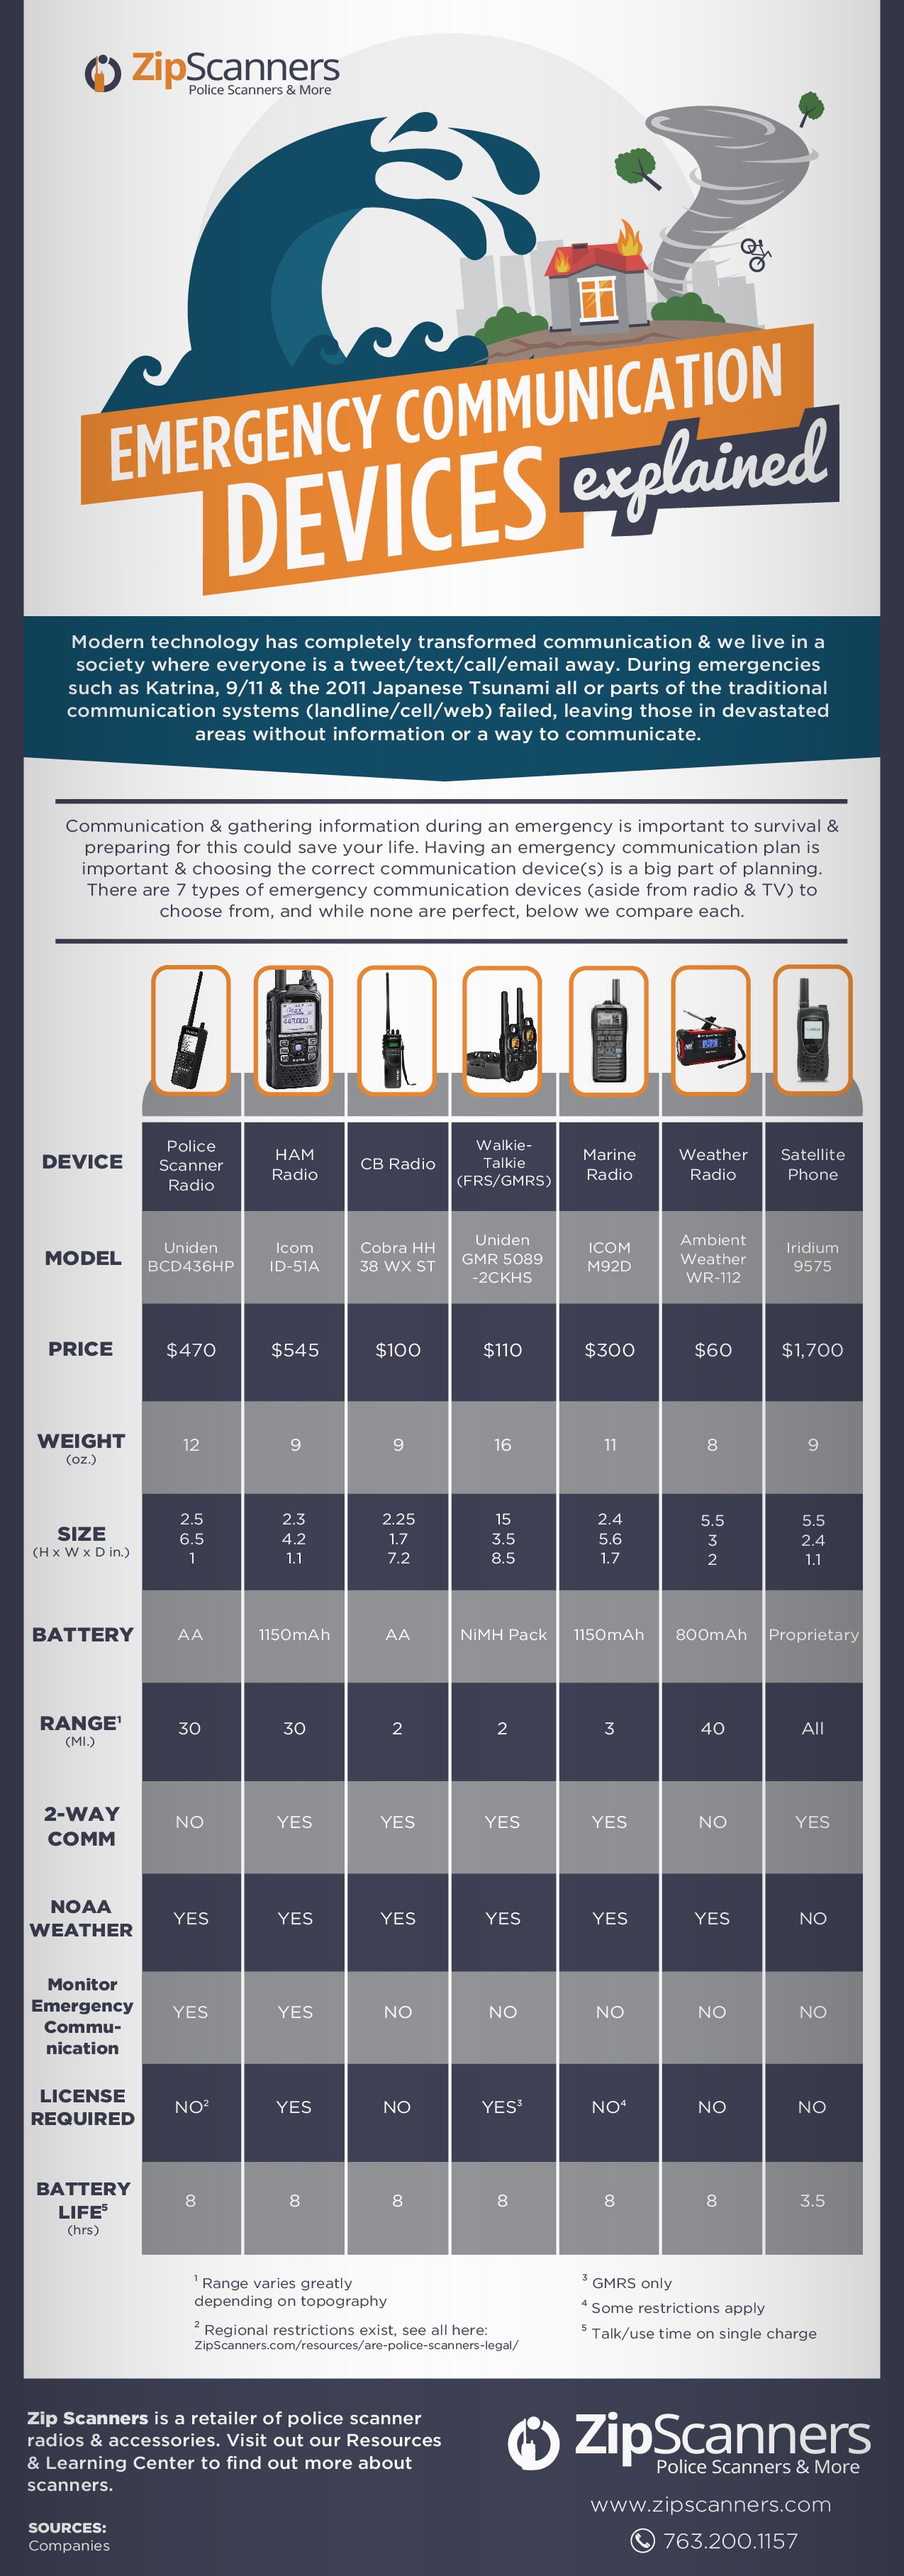 Emergency Communication Devices Compared | All 6 Options